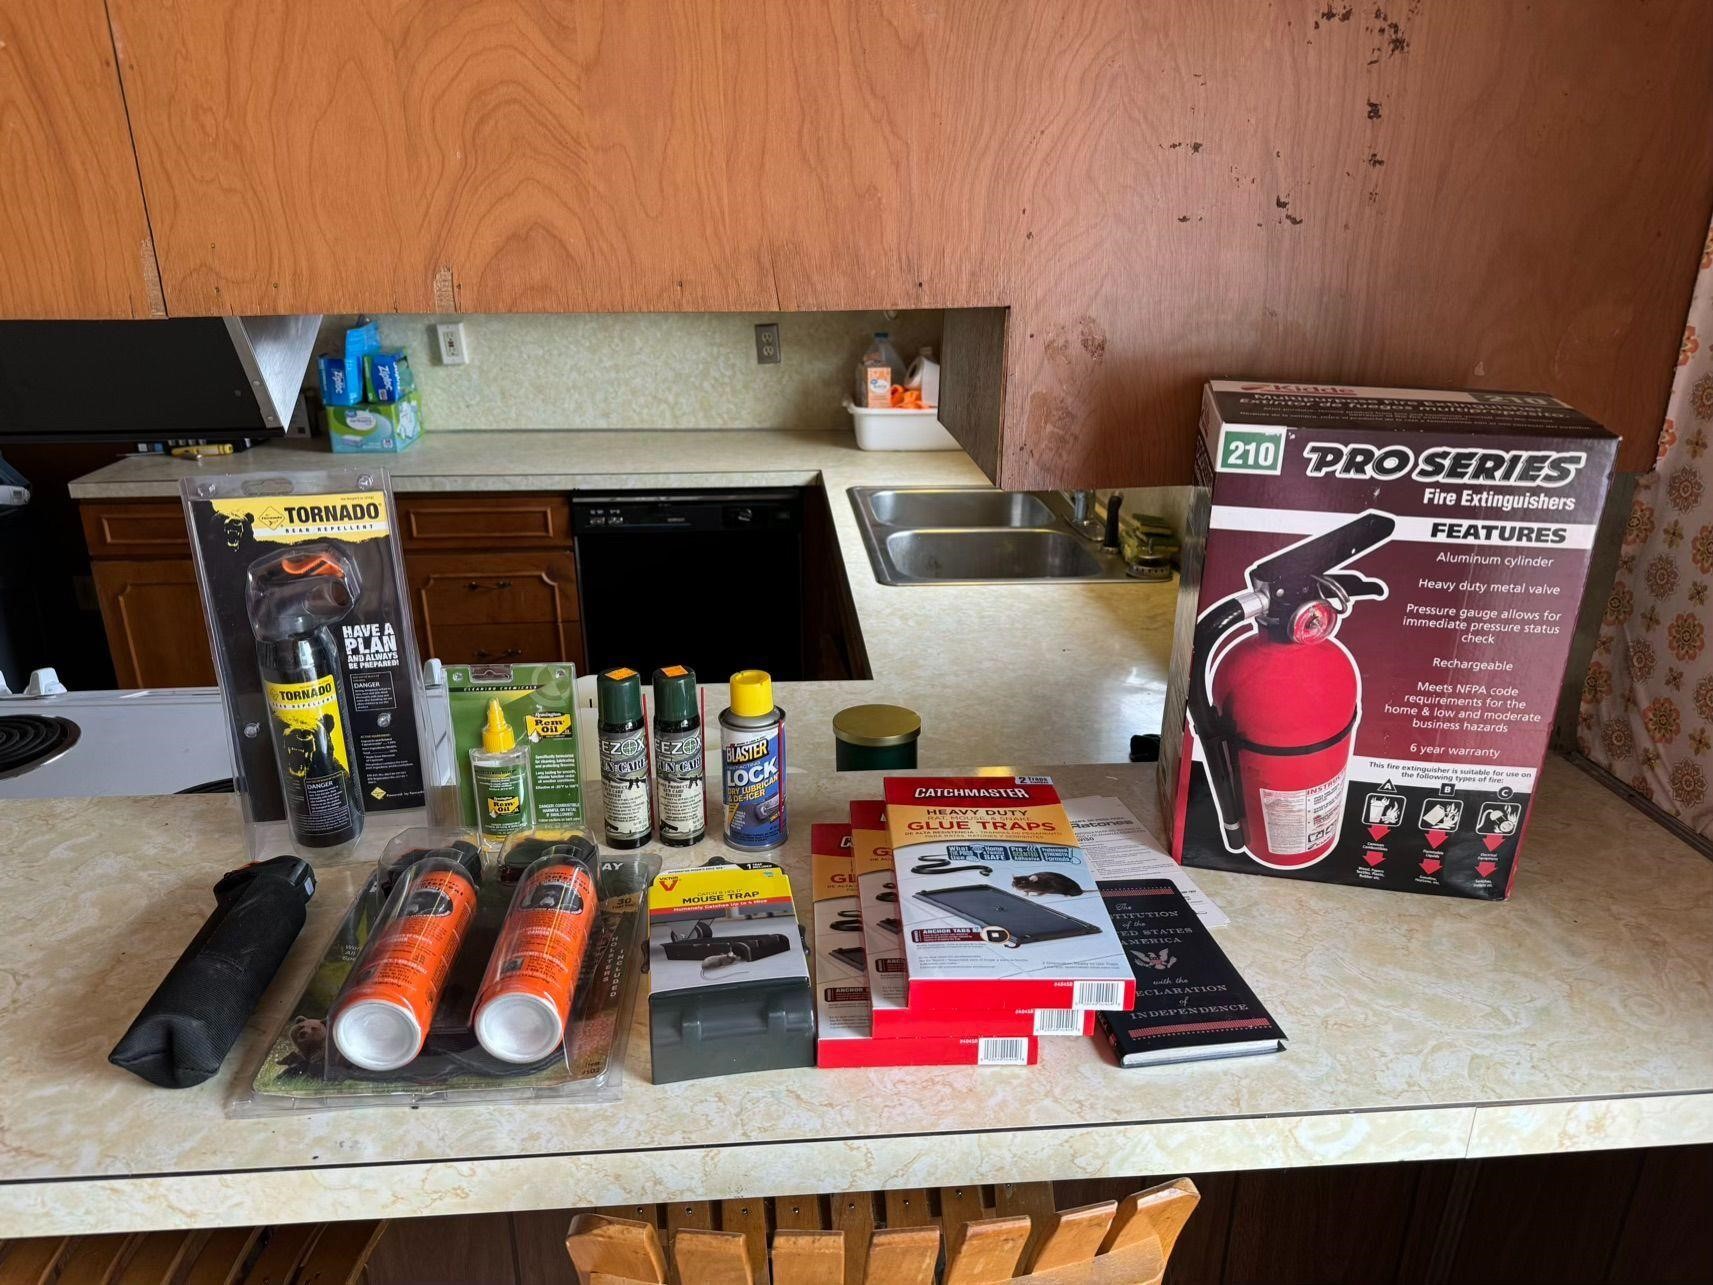 Bear Spray, Mouse Traps & Fire Extinguishers